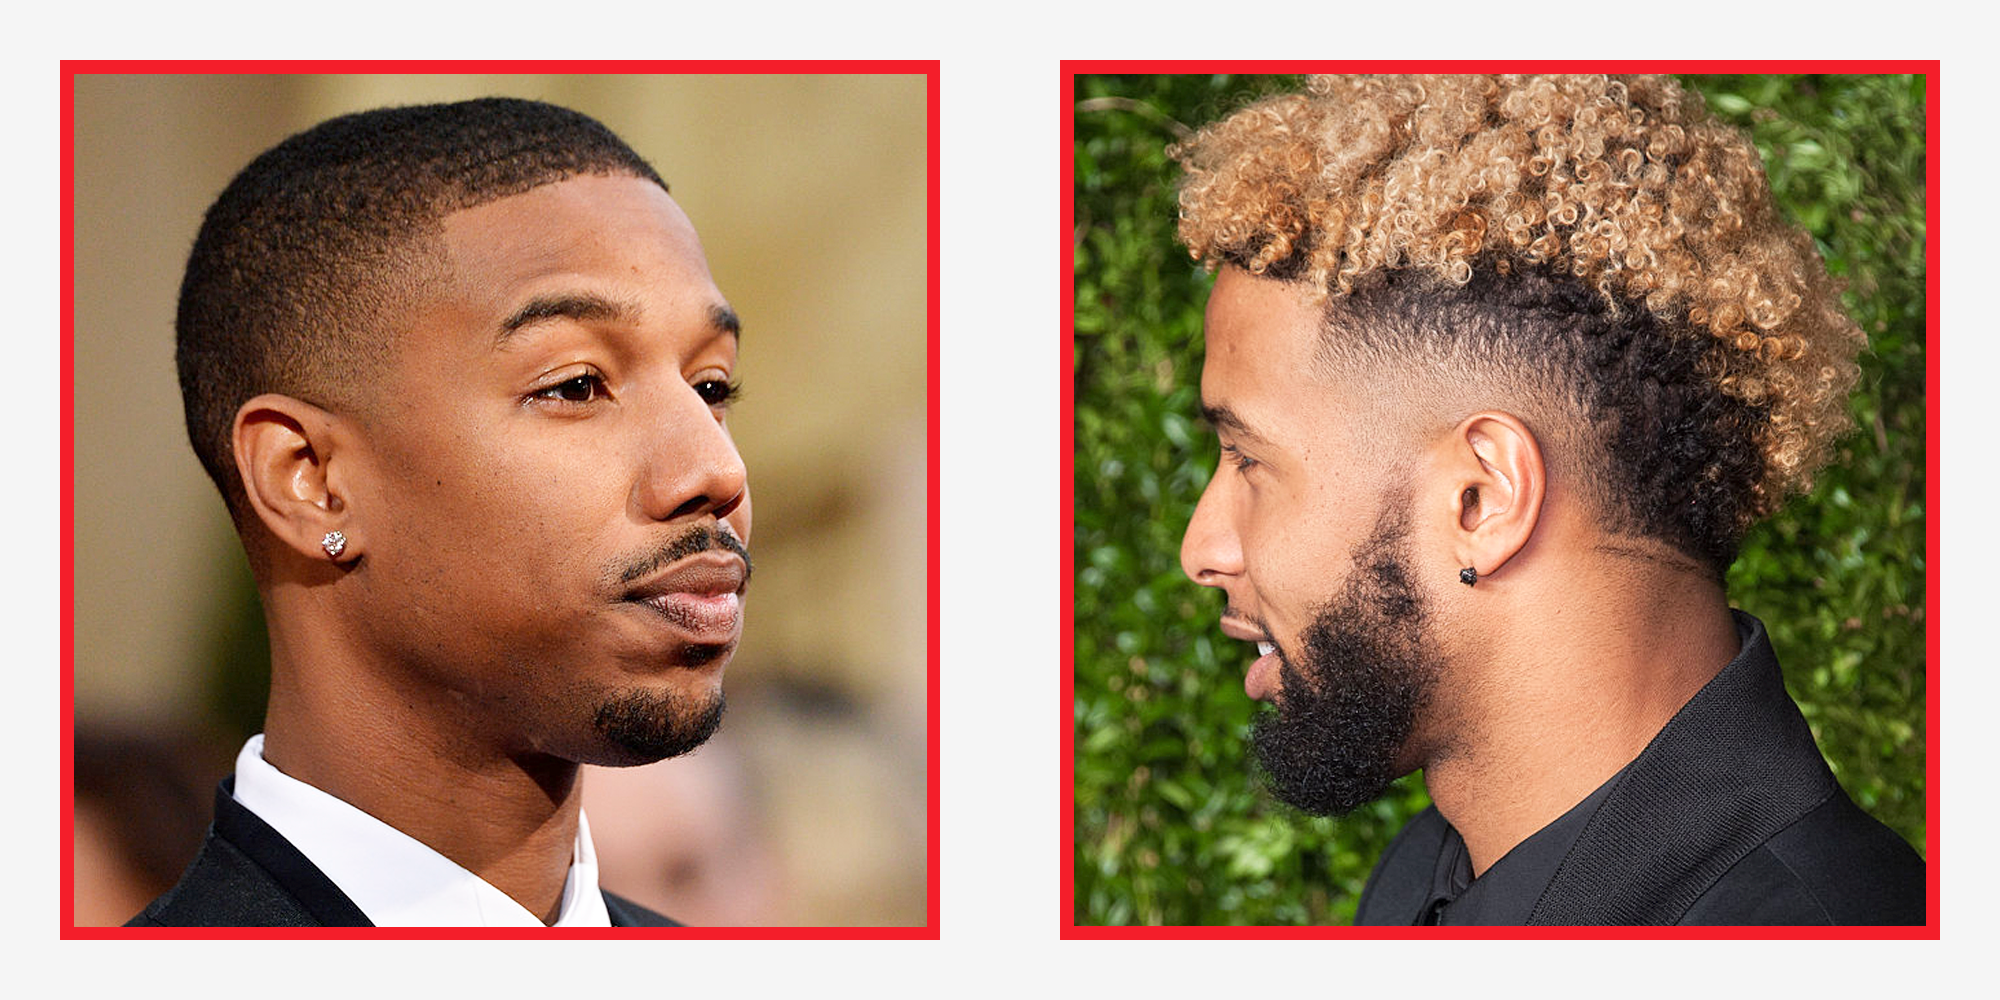 50 Top Teen Boy Haircuts For This Year